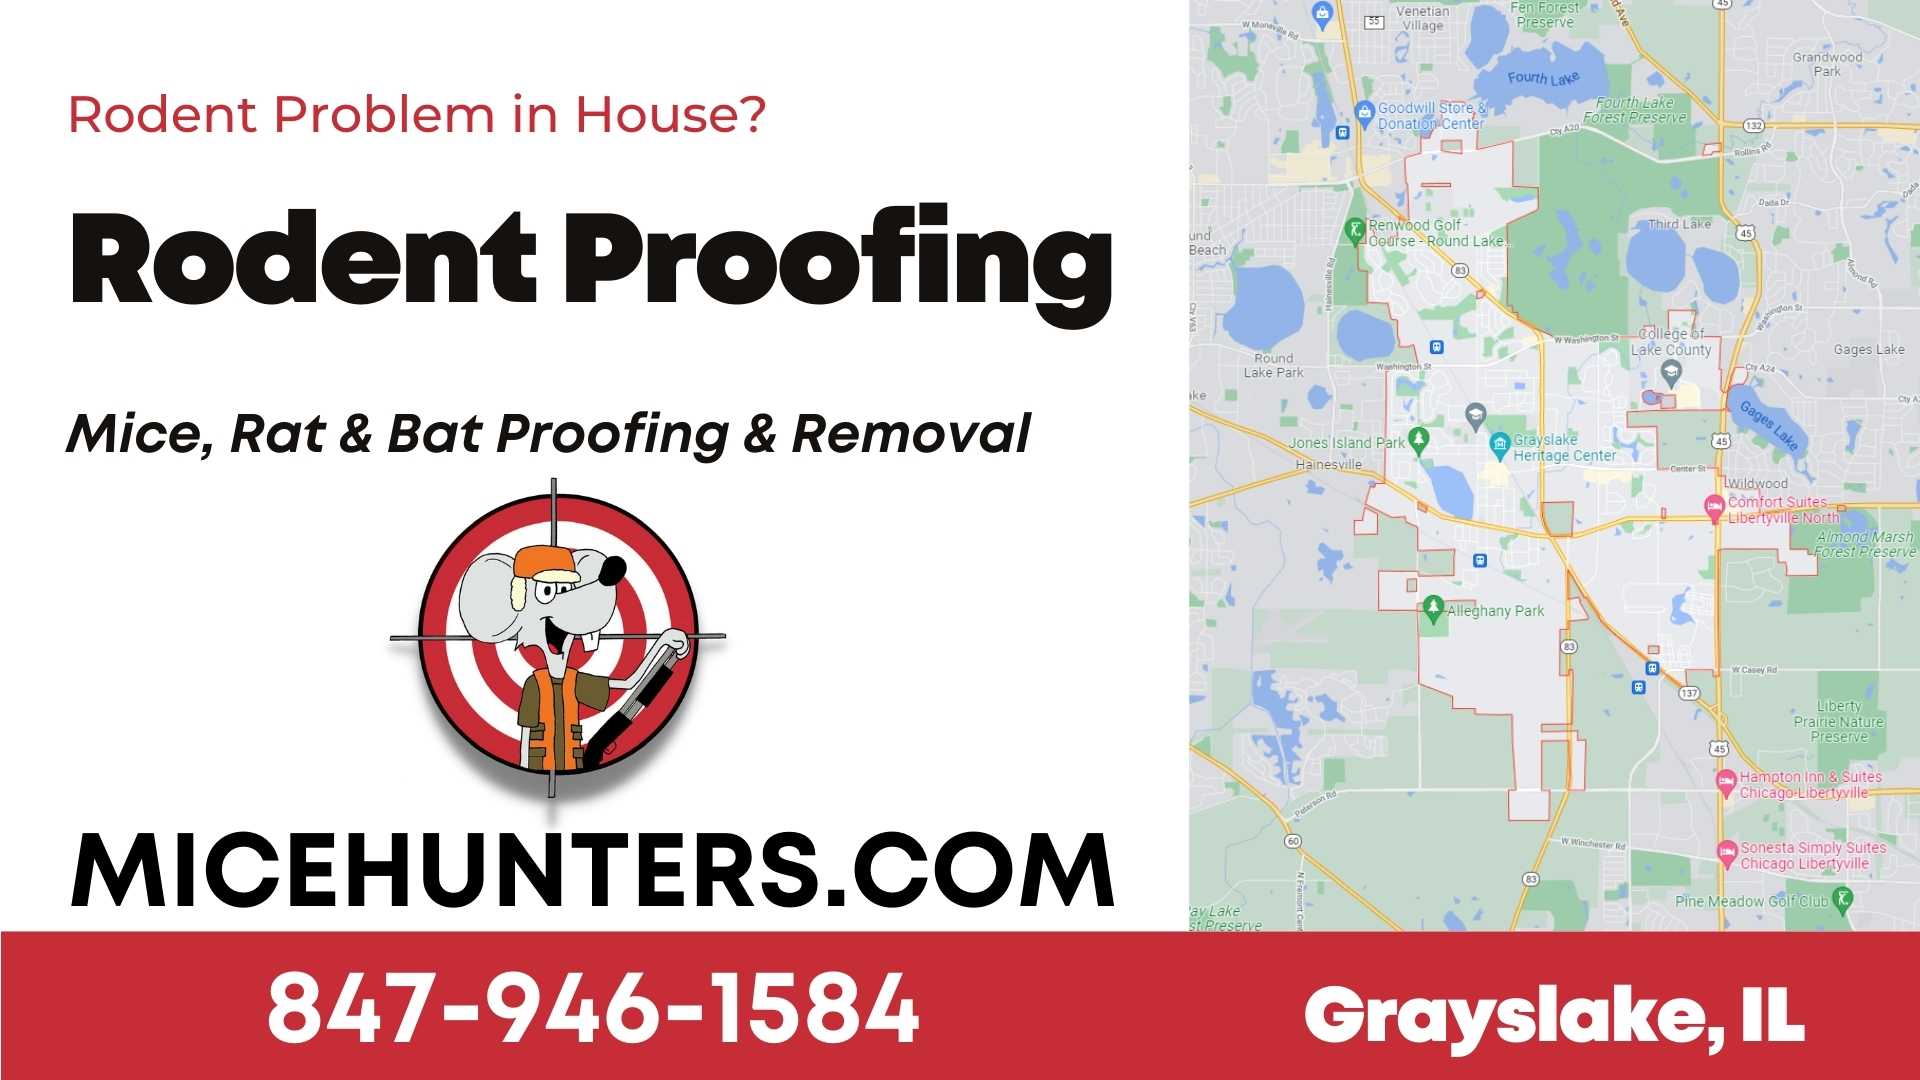 Grayslake Rodent and Mice Proofing Exterminator near me